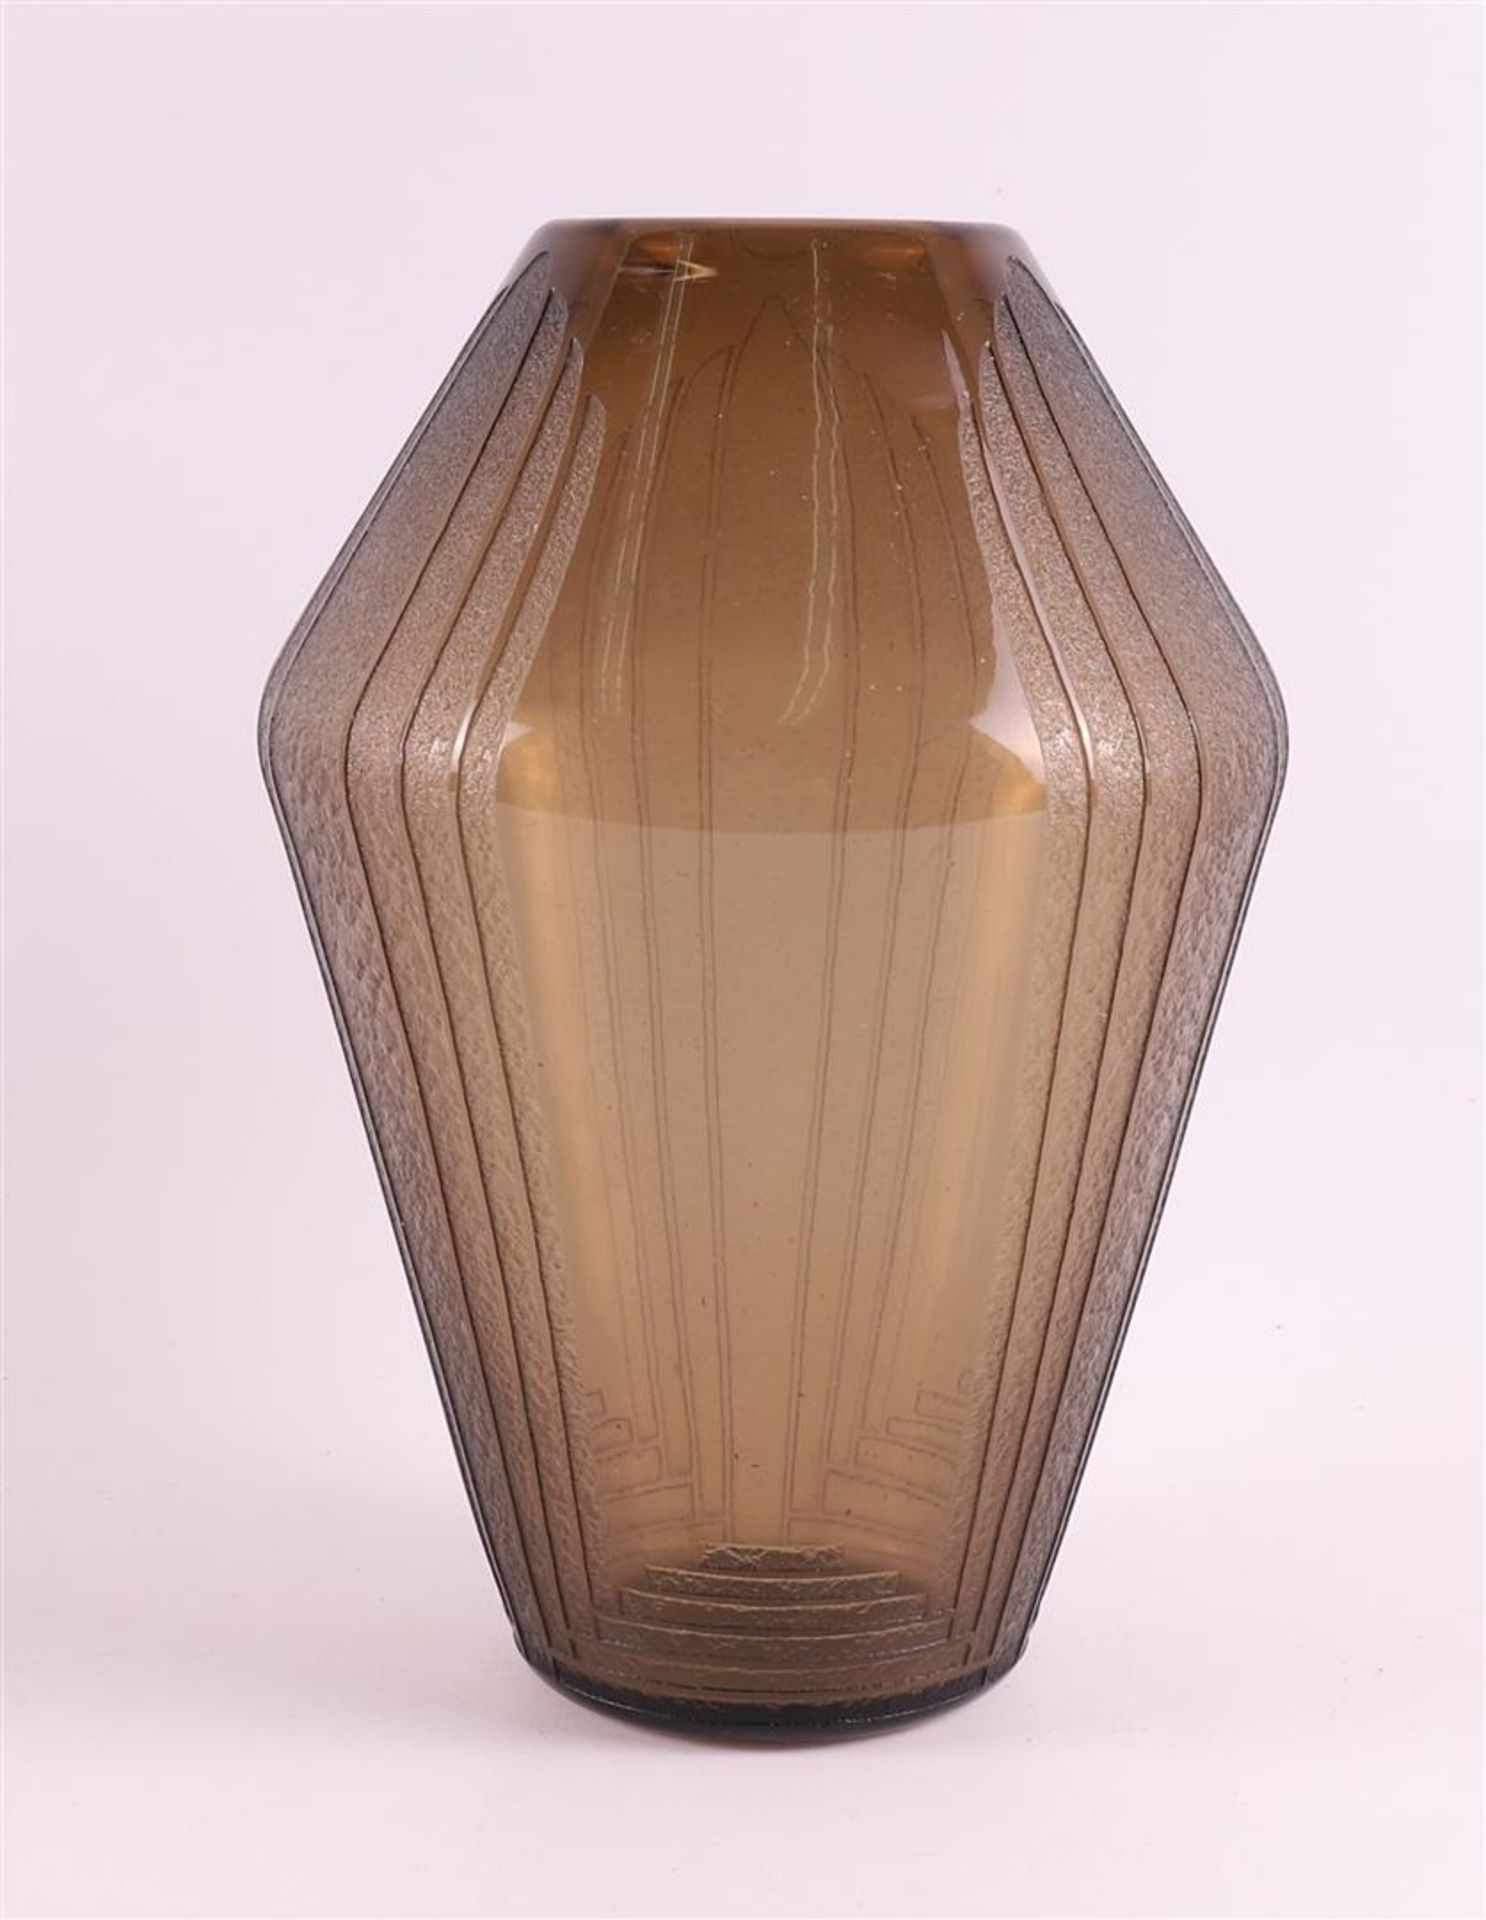 A smoked glass Art Deco vase, France, Schneider, ca. 1920. - Image 2 of 4